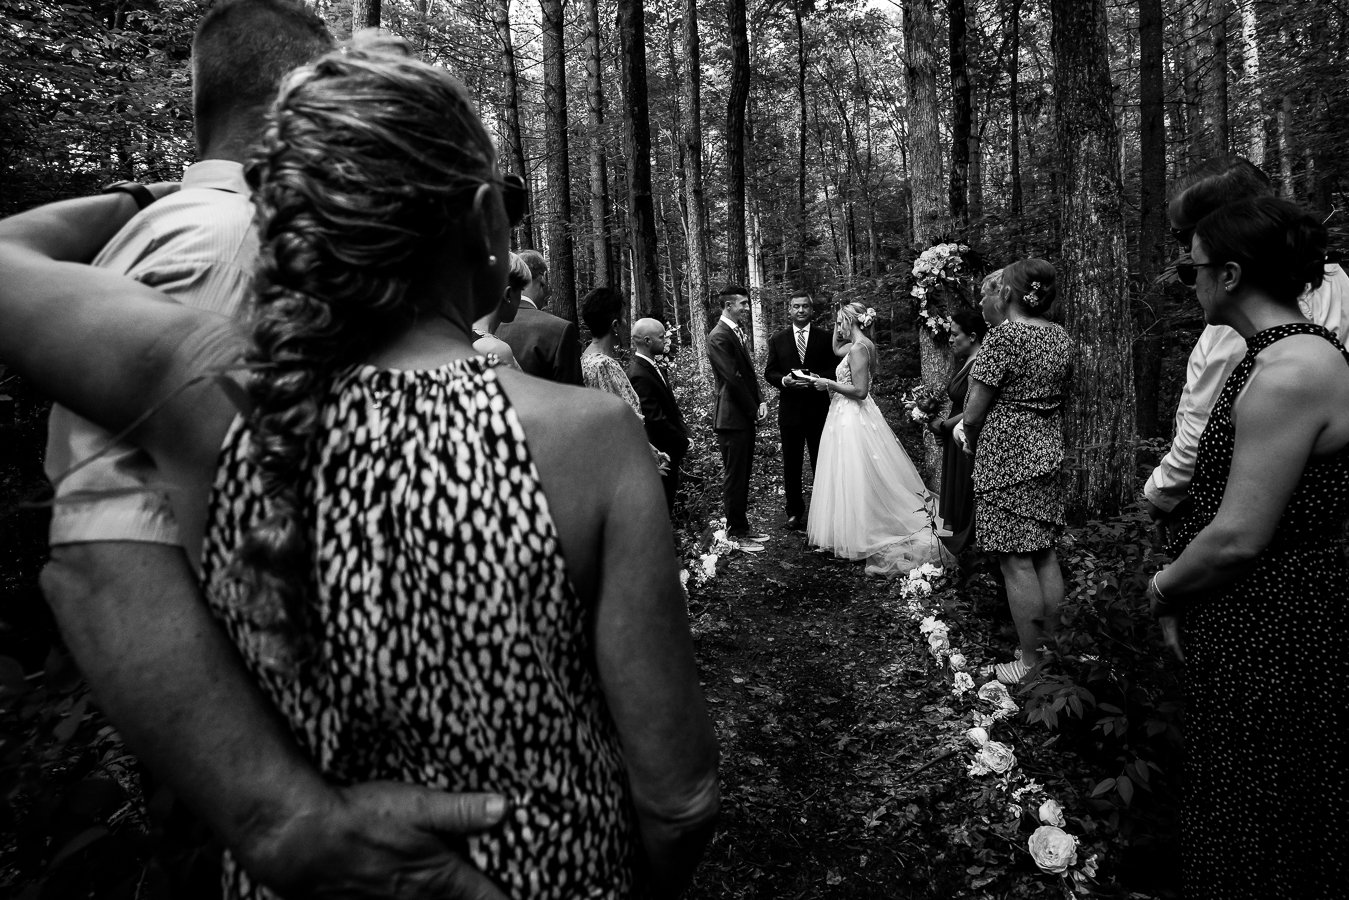 jim thorpe wedding photographer, lisa rhinehart, captures this black and white image of the bride and groom standing at the end of the aisle surrounded by friends and family for their intimate wedding ceremony